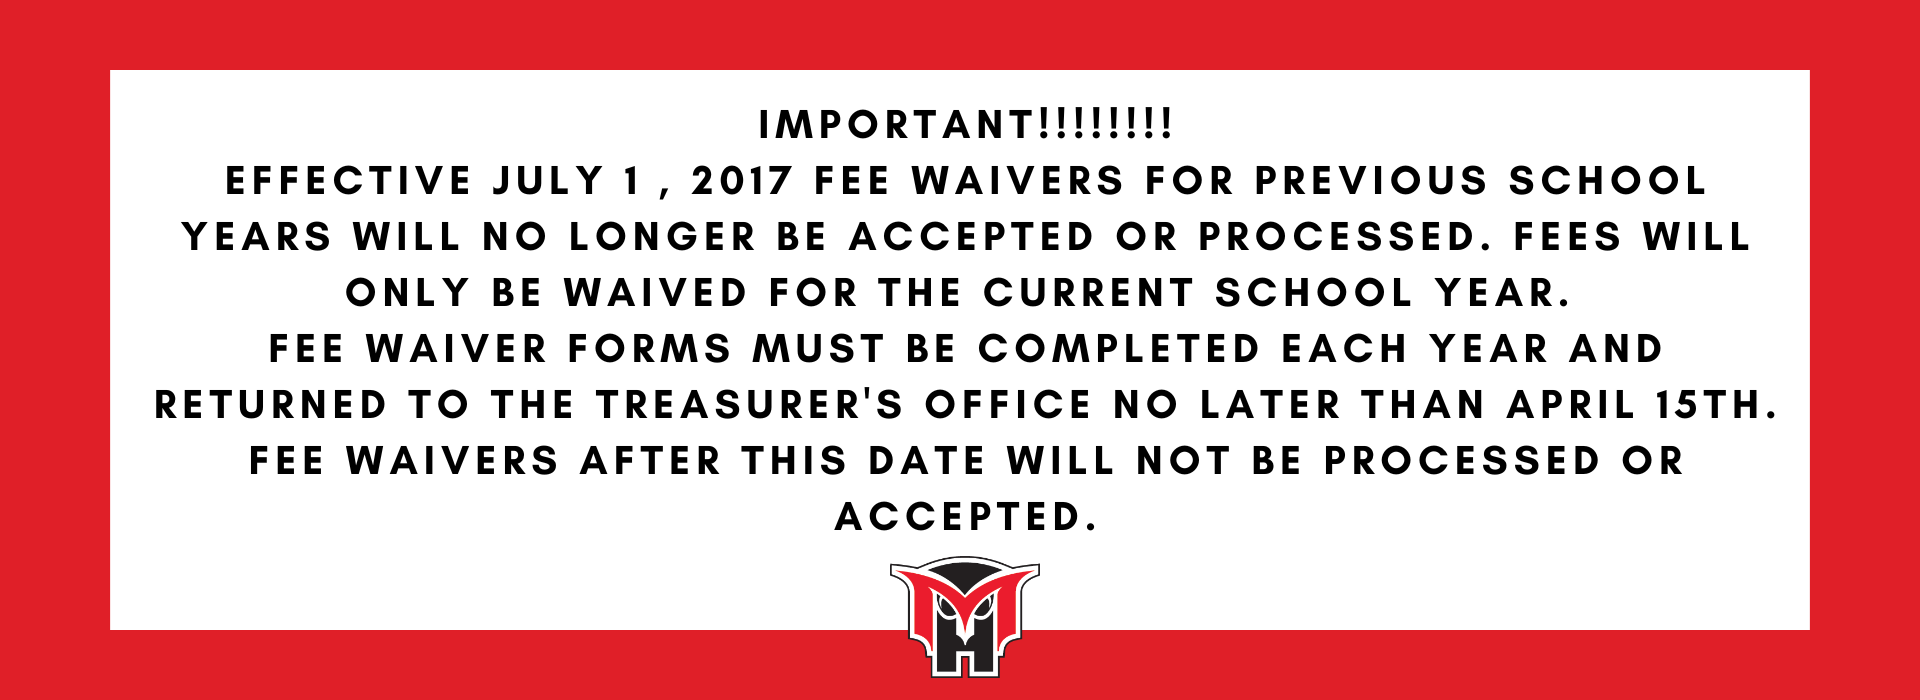 IMPORTANT!!!!!!!!  Effective July 1 , 2017 fee waivers for previous school years will no longer be accepted or processed.  Fees will only be waived for the current school year.   Fee waiver forms must be completed each year and returned to the Treasurer's Office no later than April 15th.  Fee Waivers after this date will NOT be processed or accepted.